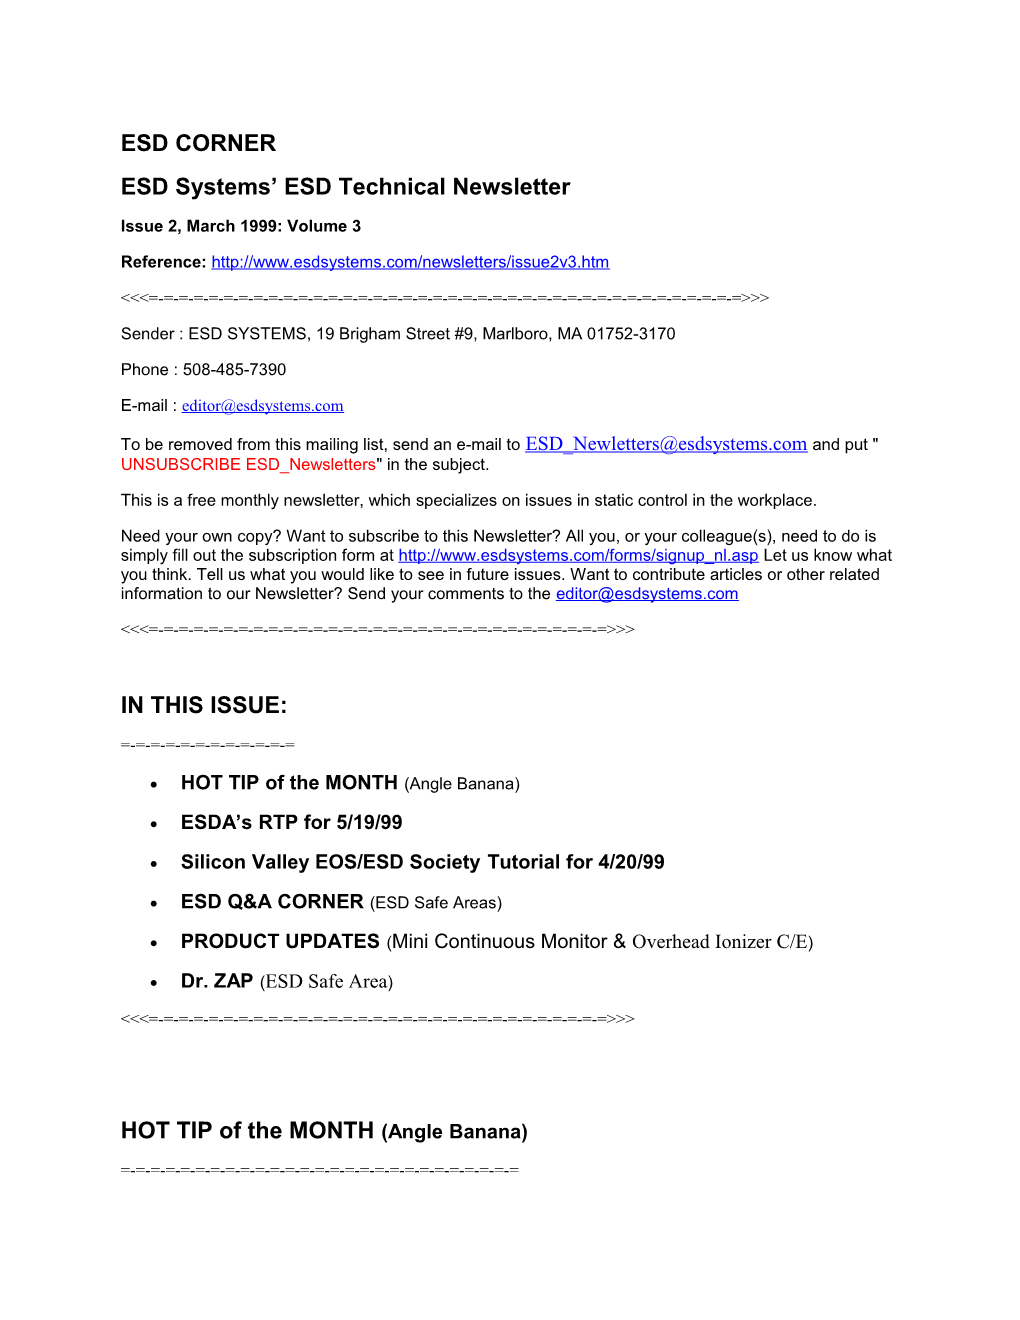 ESD Systems ESD Technical Newsletter